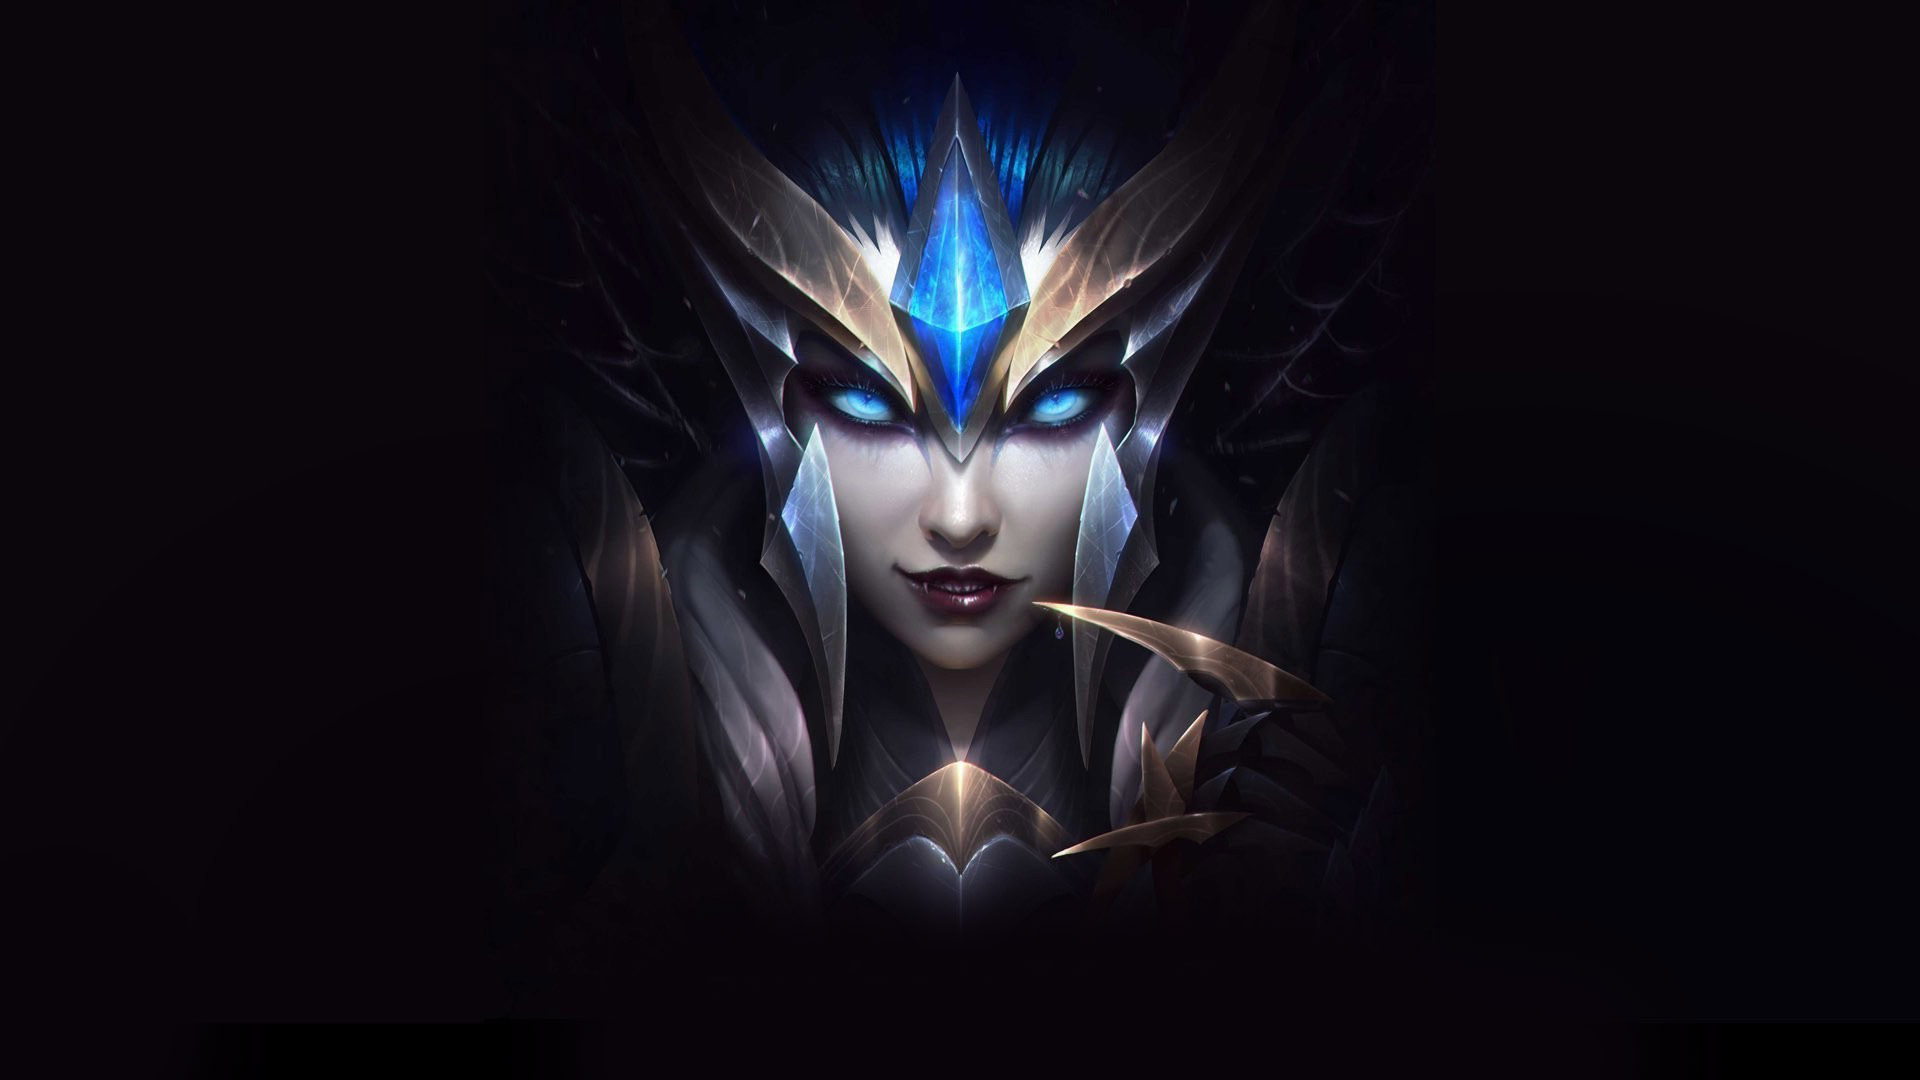 Free download League of Legends HD Wallpapers Best Wallpapers